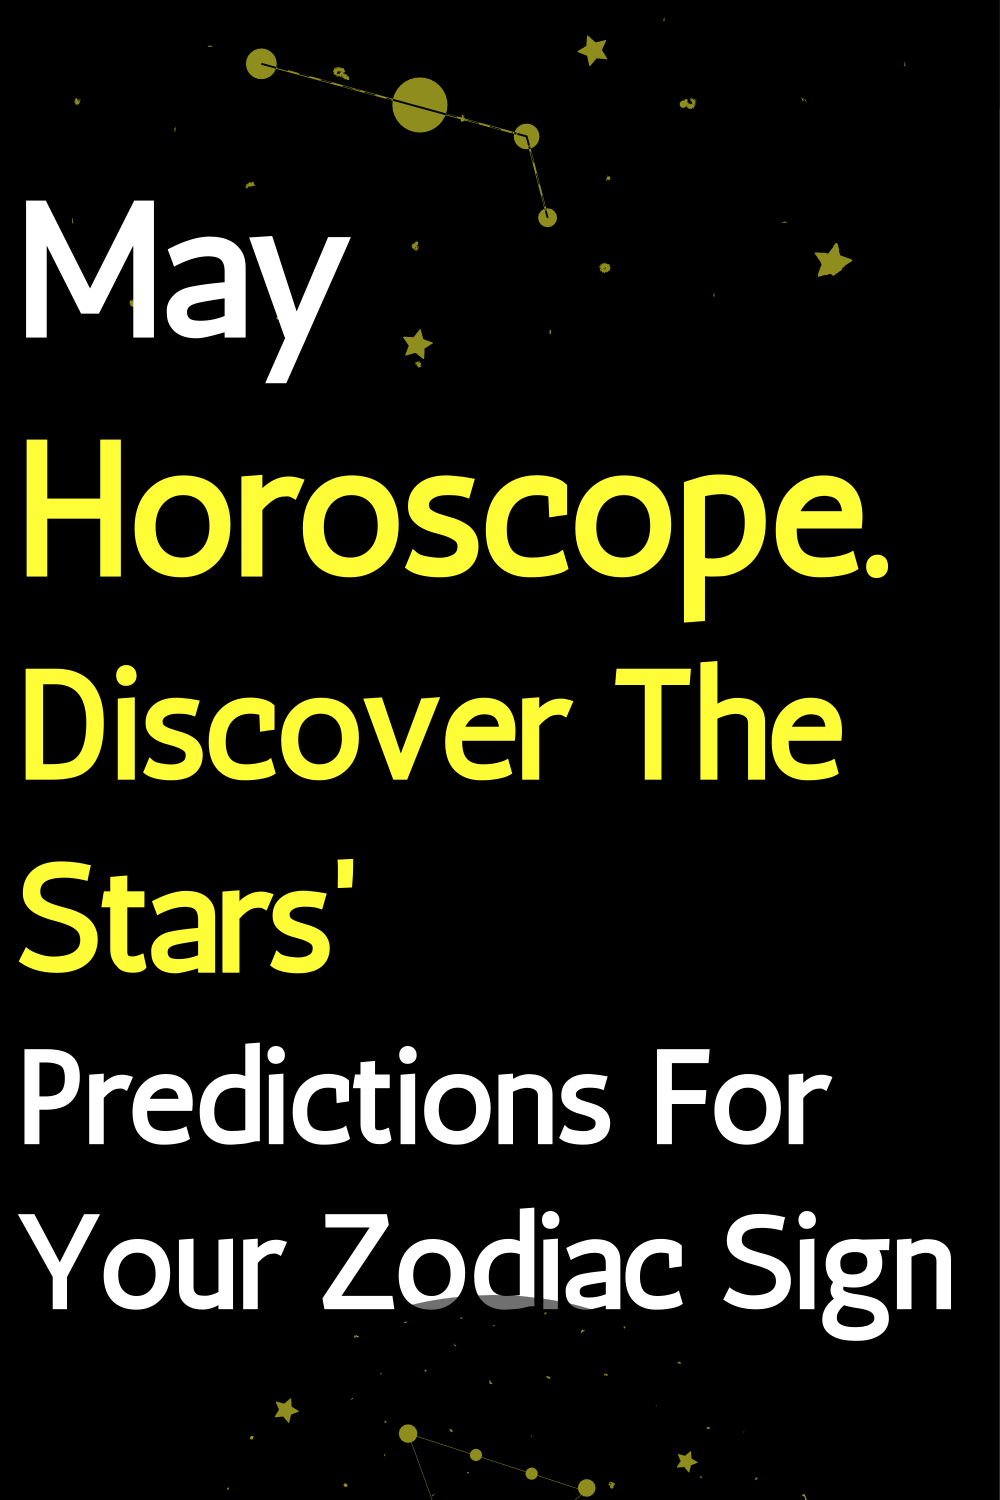 May Horoscope. Discover The Stars' Predictions For Your Zodiac Sign